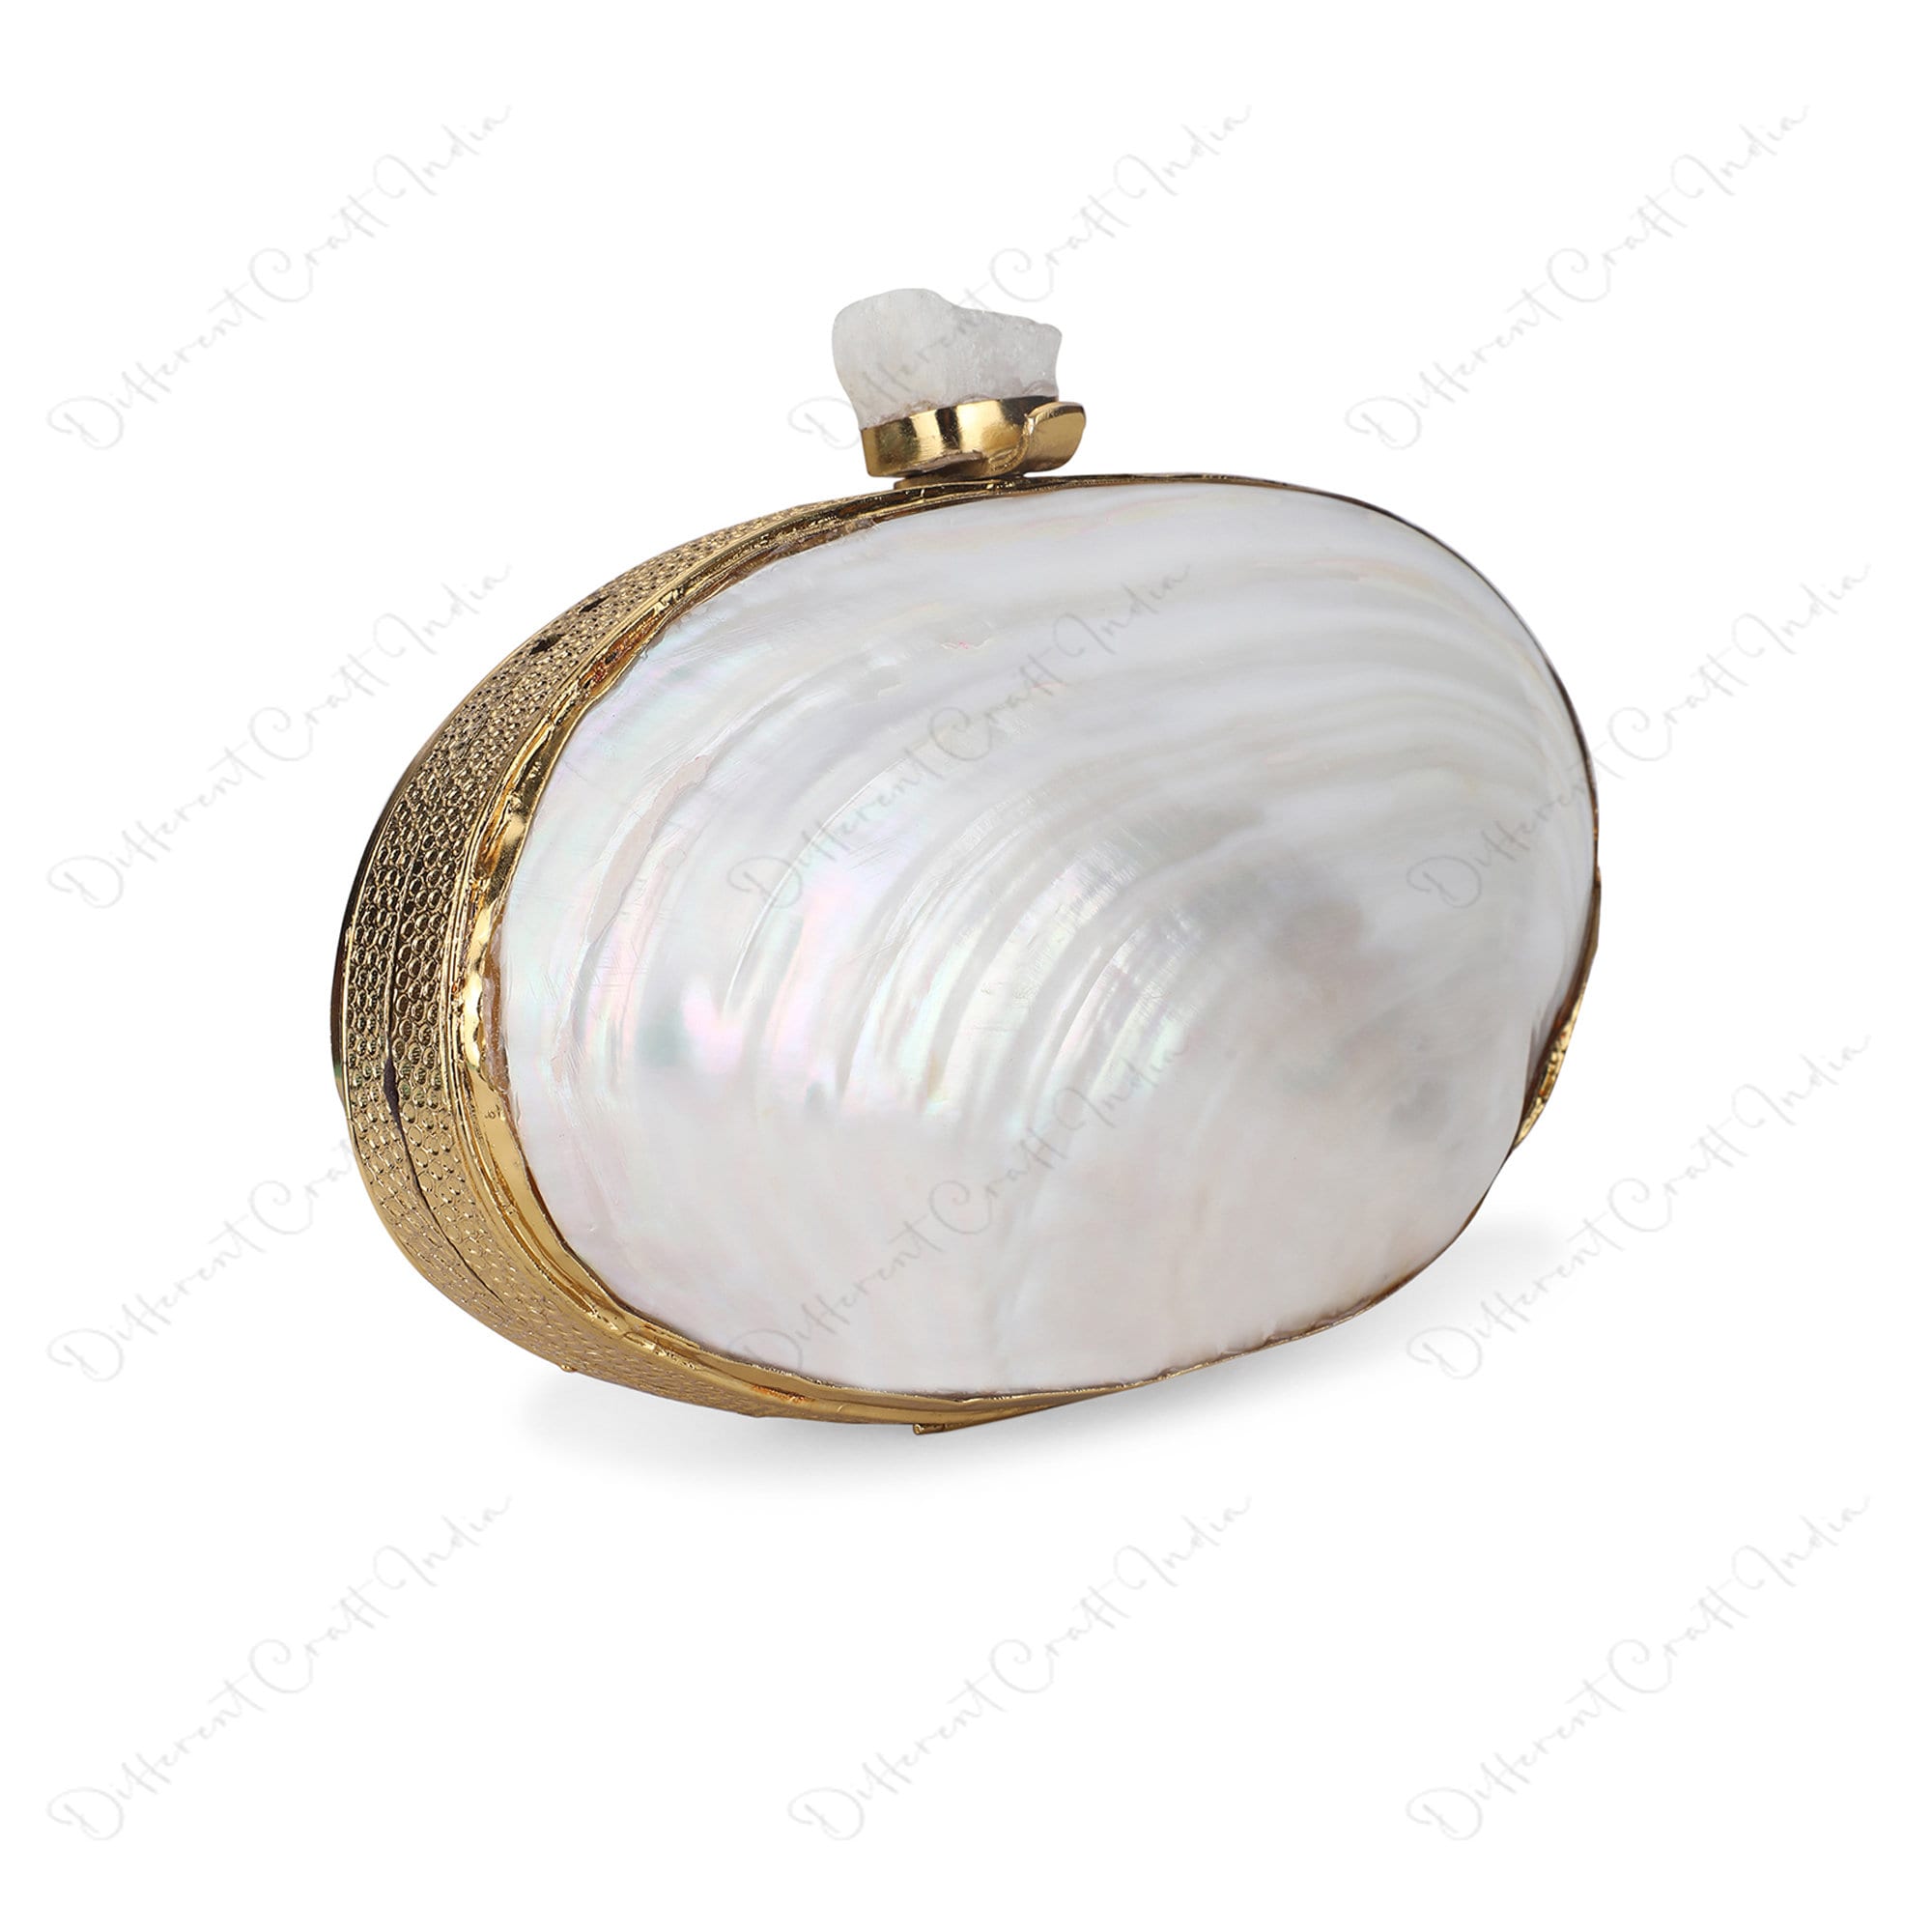 Ivory Pearl Beads Shell Clutch Purses Wedding Bags